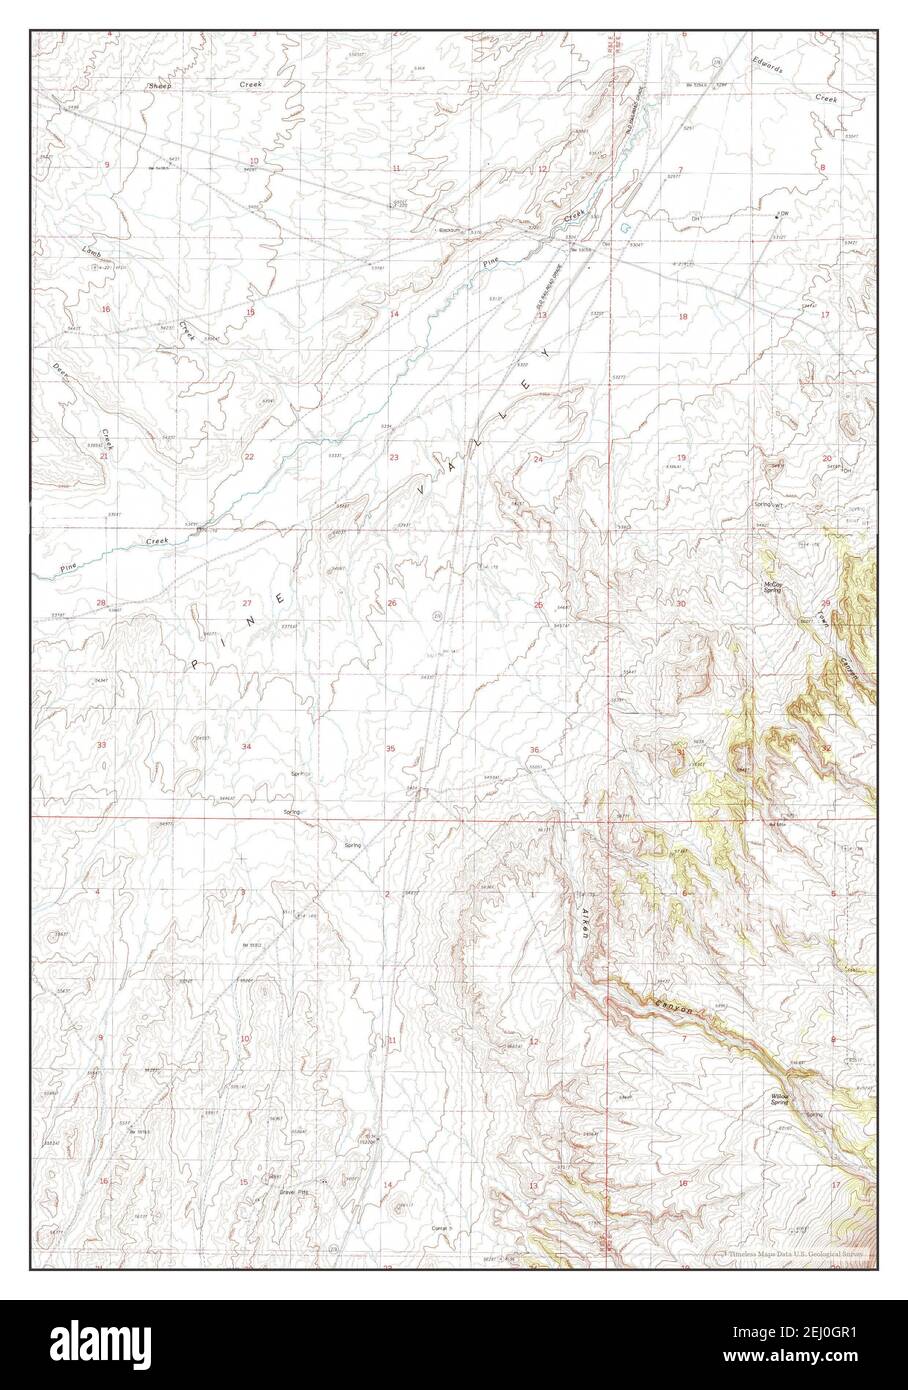 Mineral Hill NW, Nevada, map 1986, 1:24000, United States of America by Timeless Maps, data U.S. Geological Survey Foto Stock